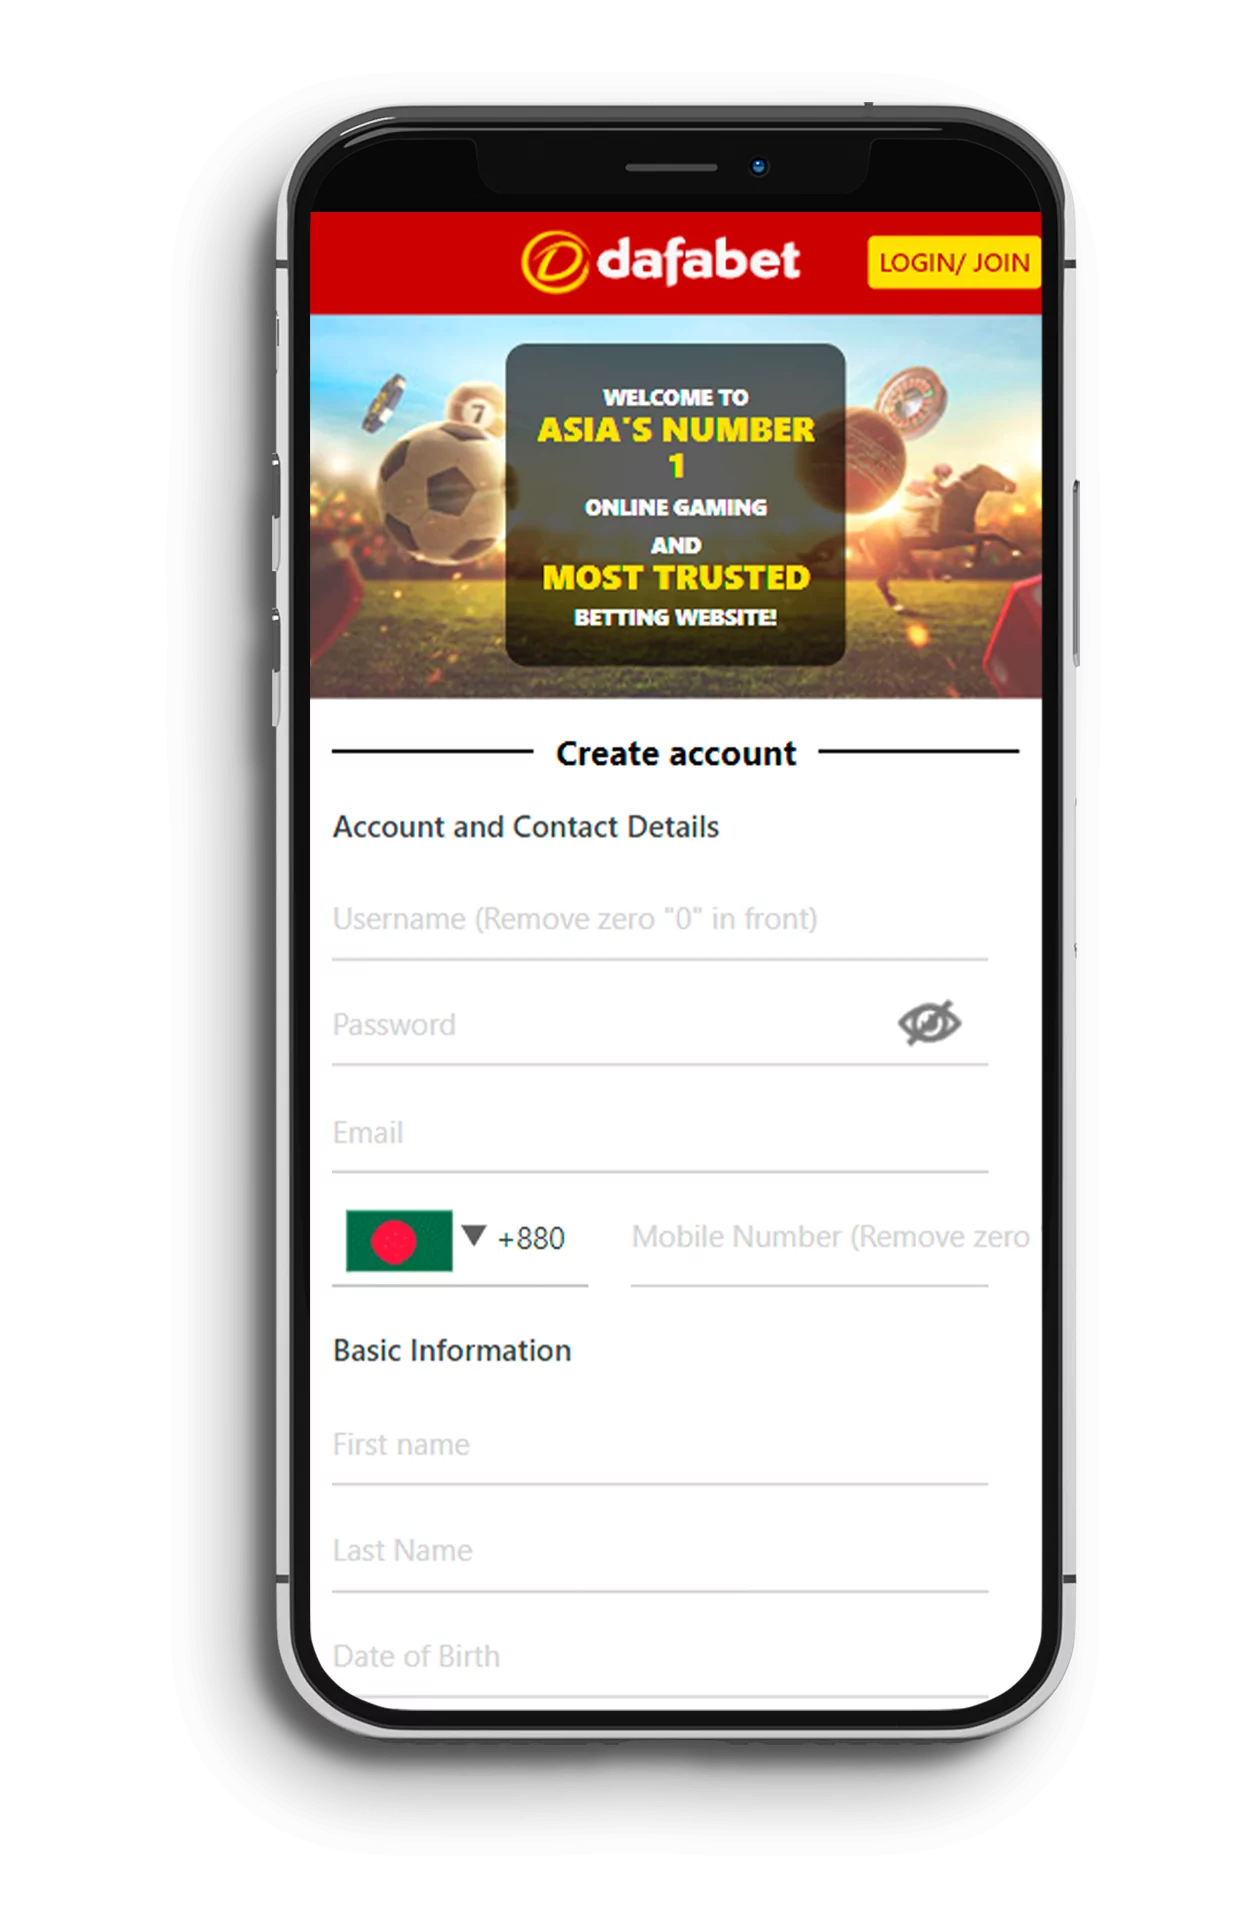 Step 4: Cteate an account and start betting with Dafabet app.